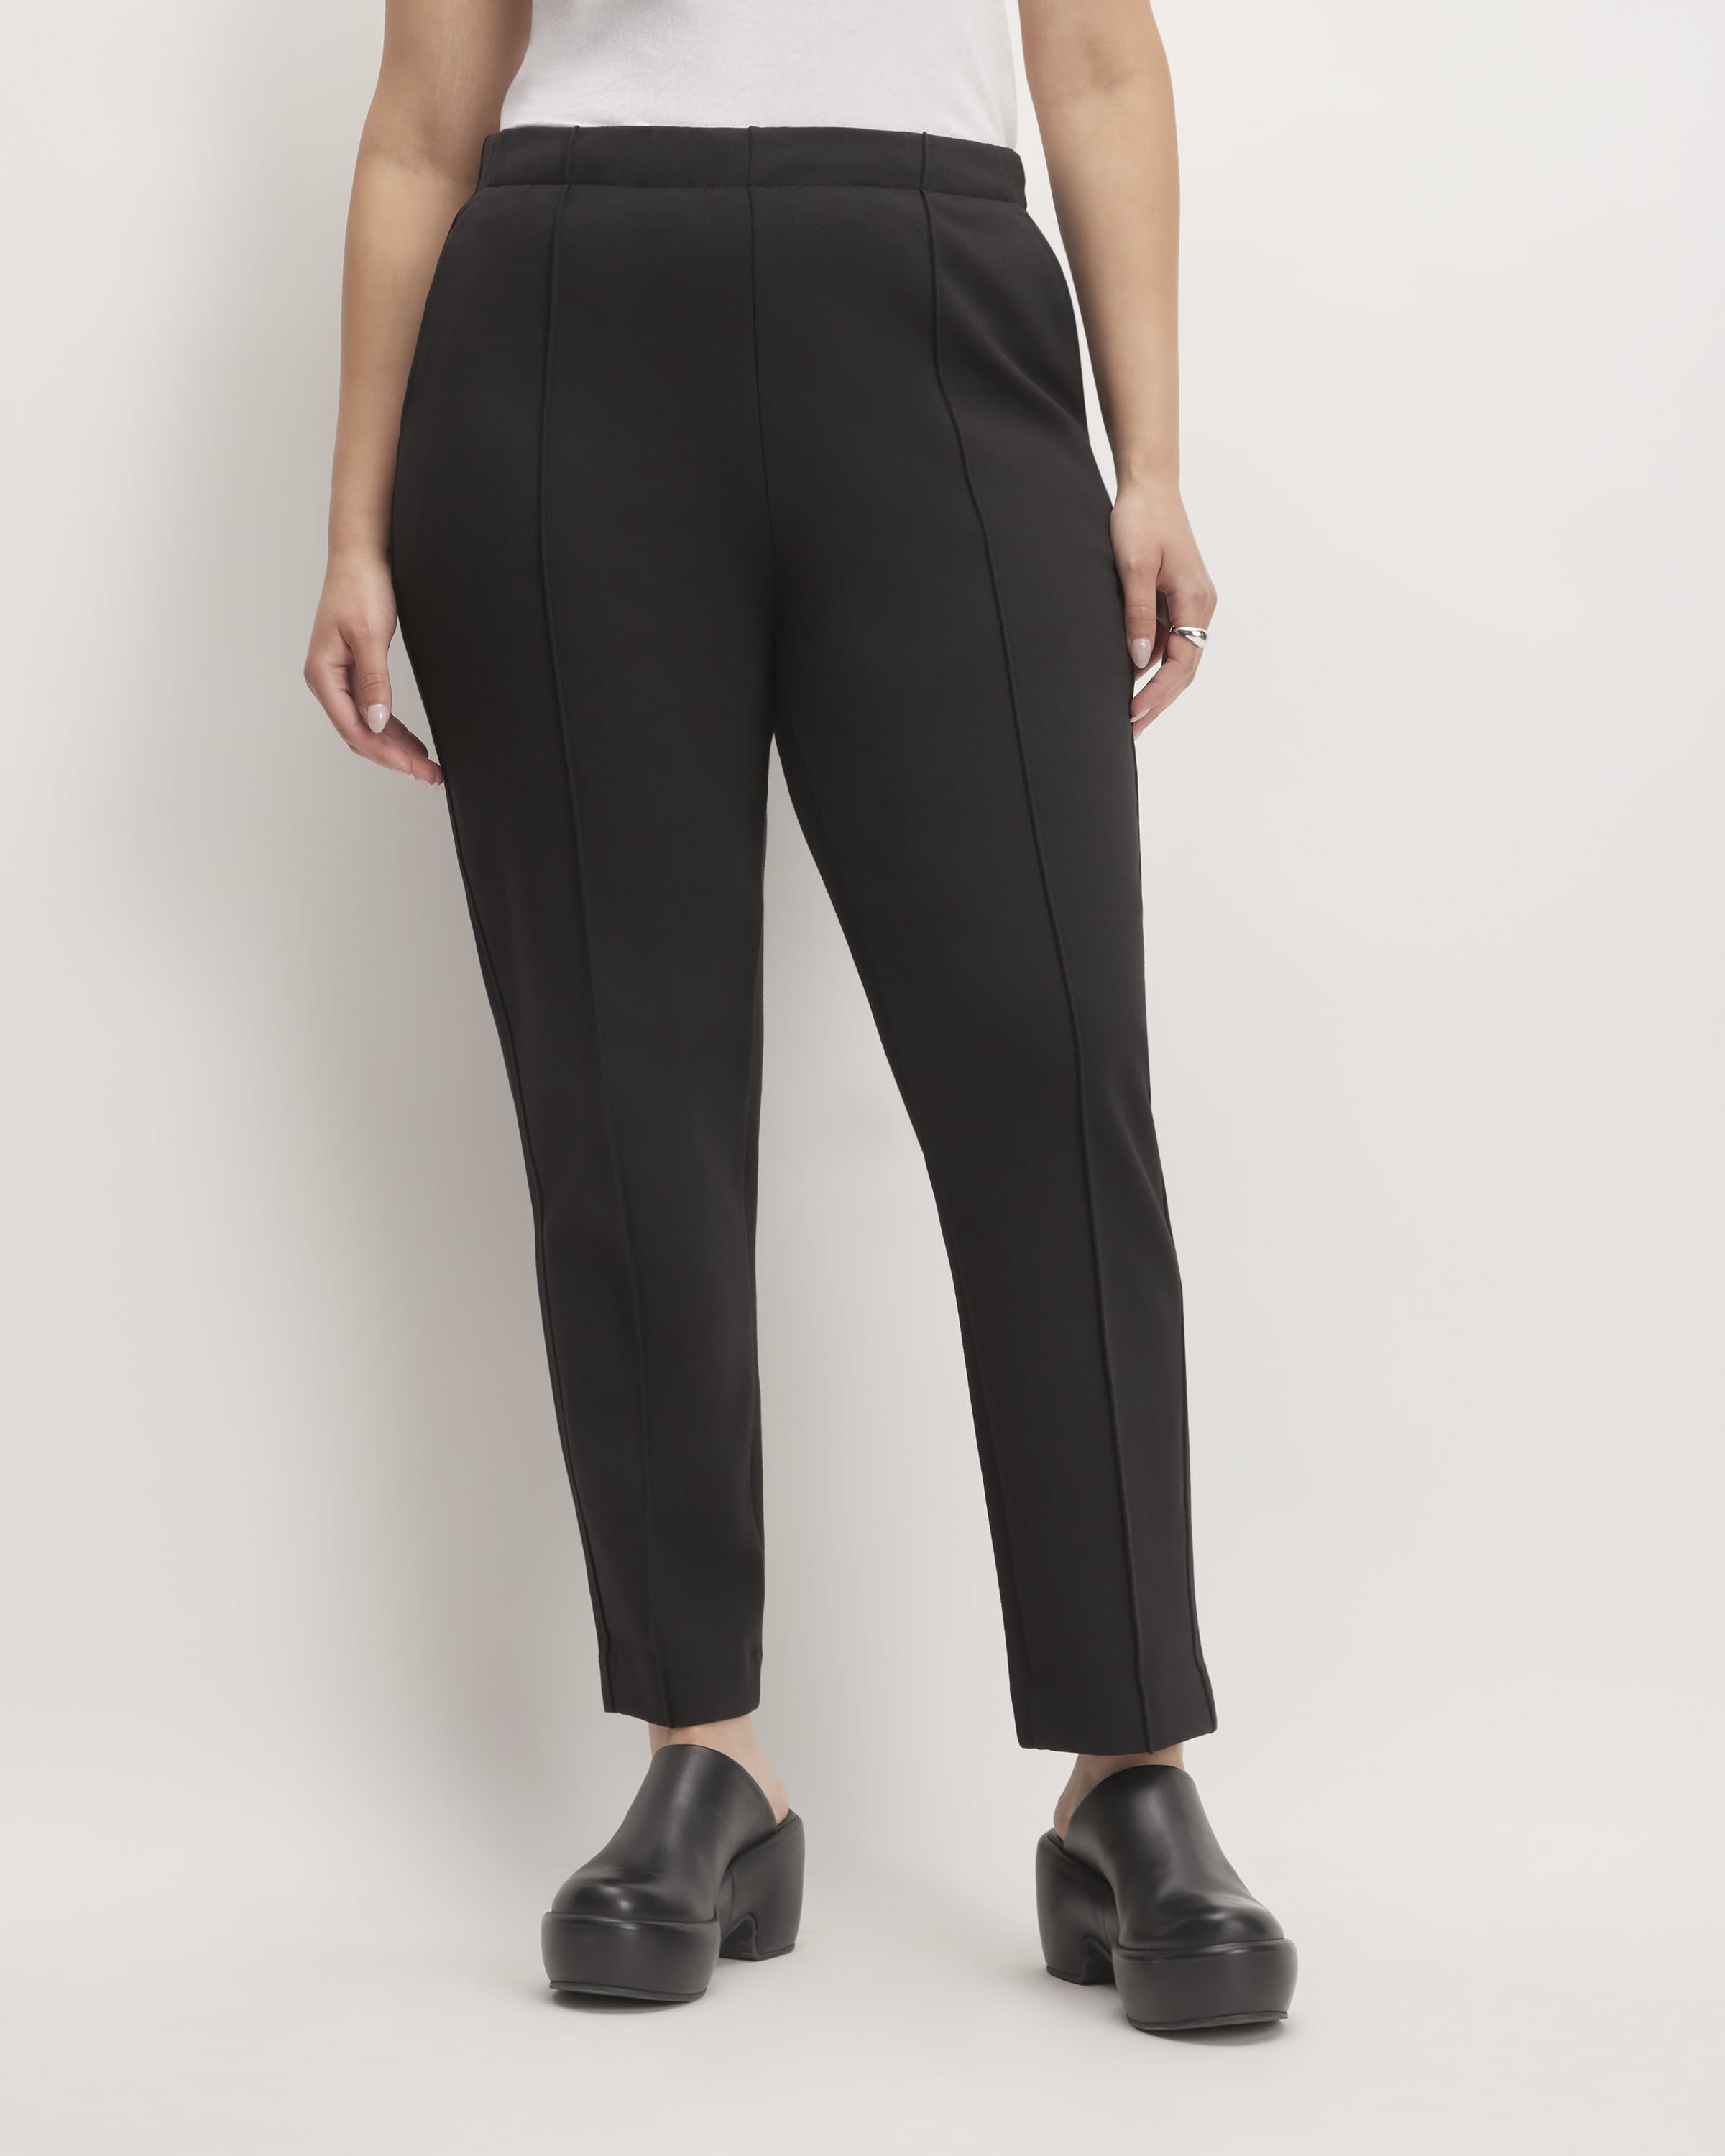 Everlane, @aliisonyu styles The Dream Pant aka the perfect summer to fall  transition pant. #Everlane #EverlaneKickFlarePant #TheKickFlarePant #She